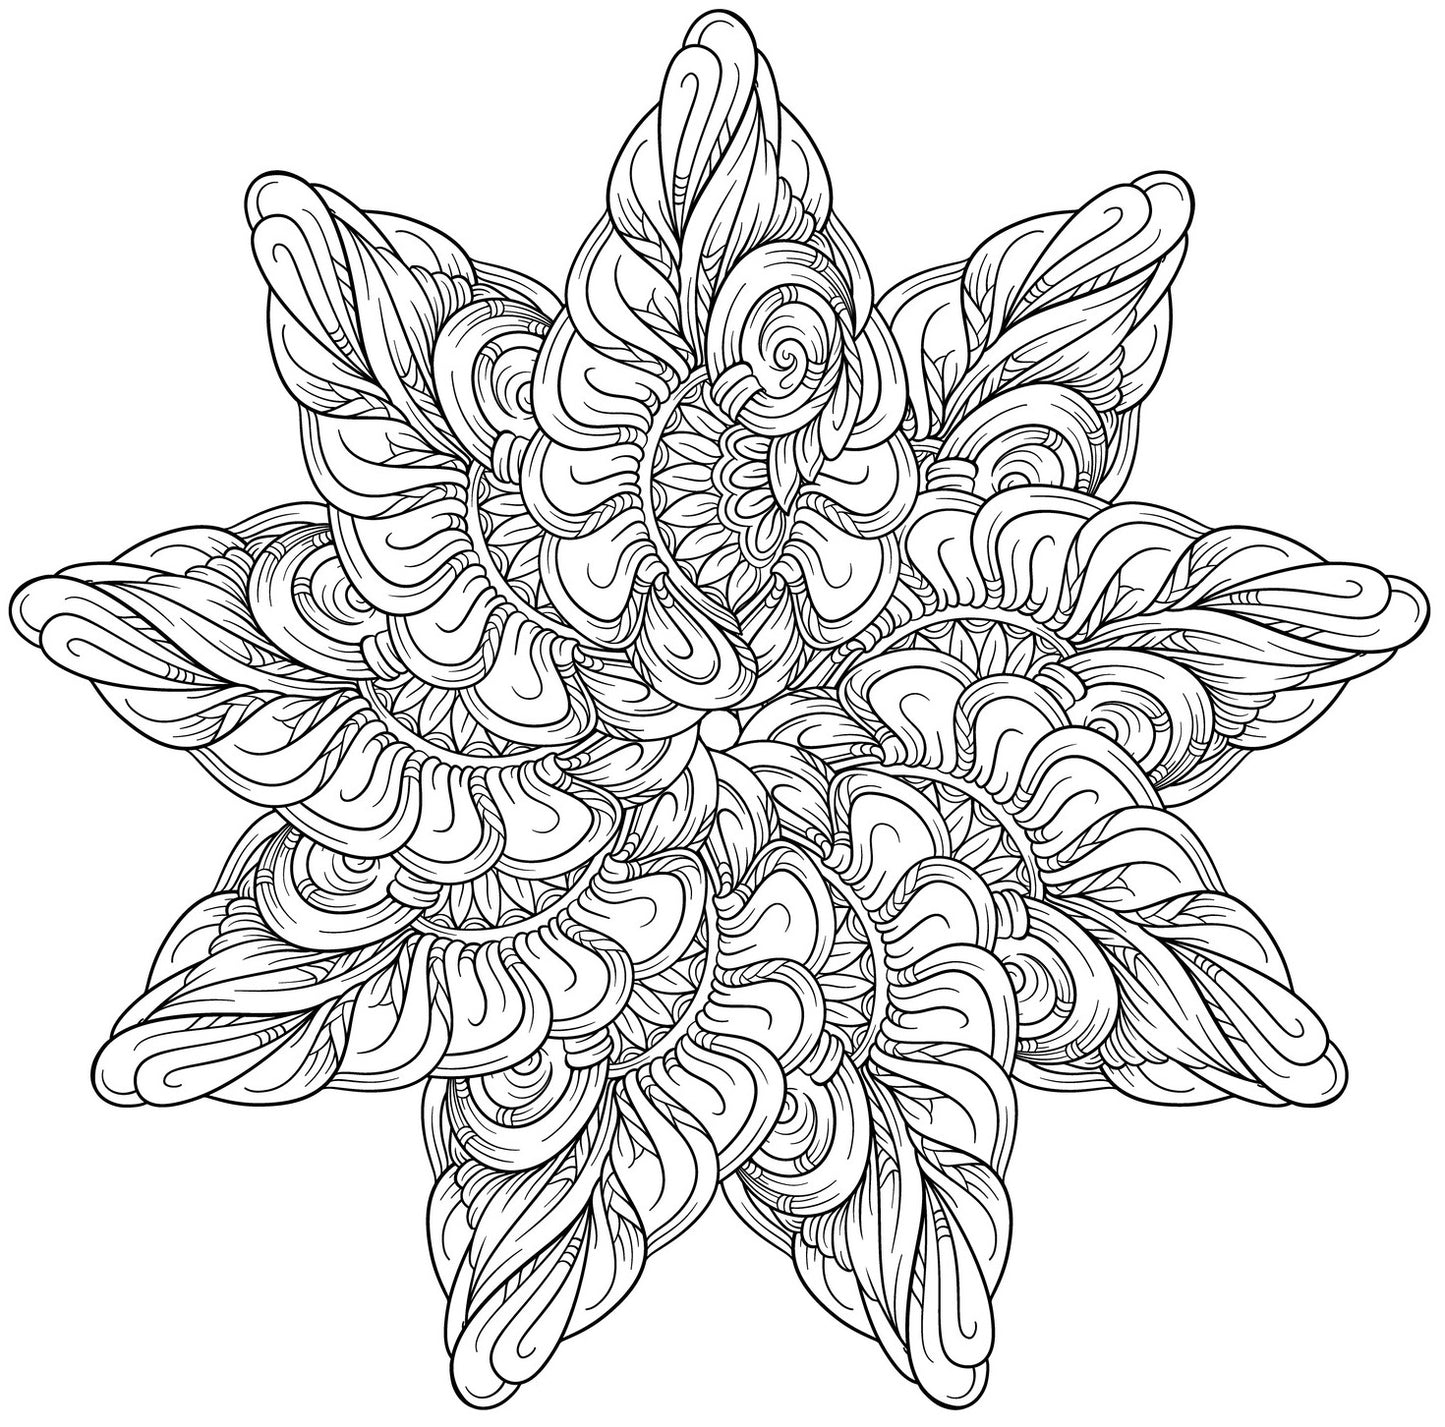 Mandala Stars - Stress Relieving Patterns Coloring Book